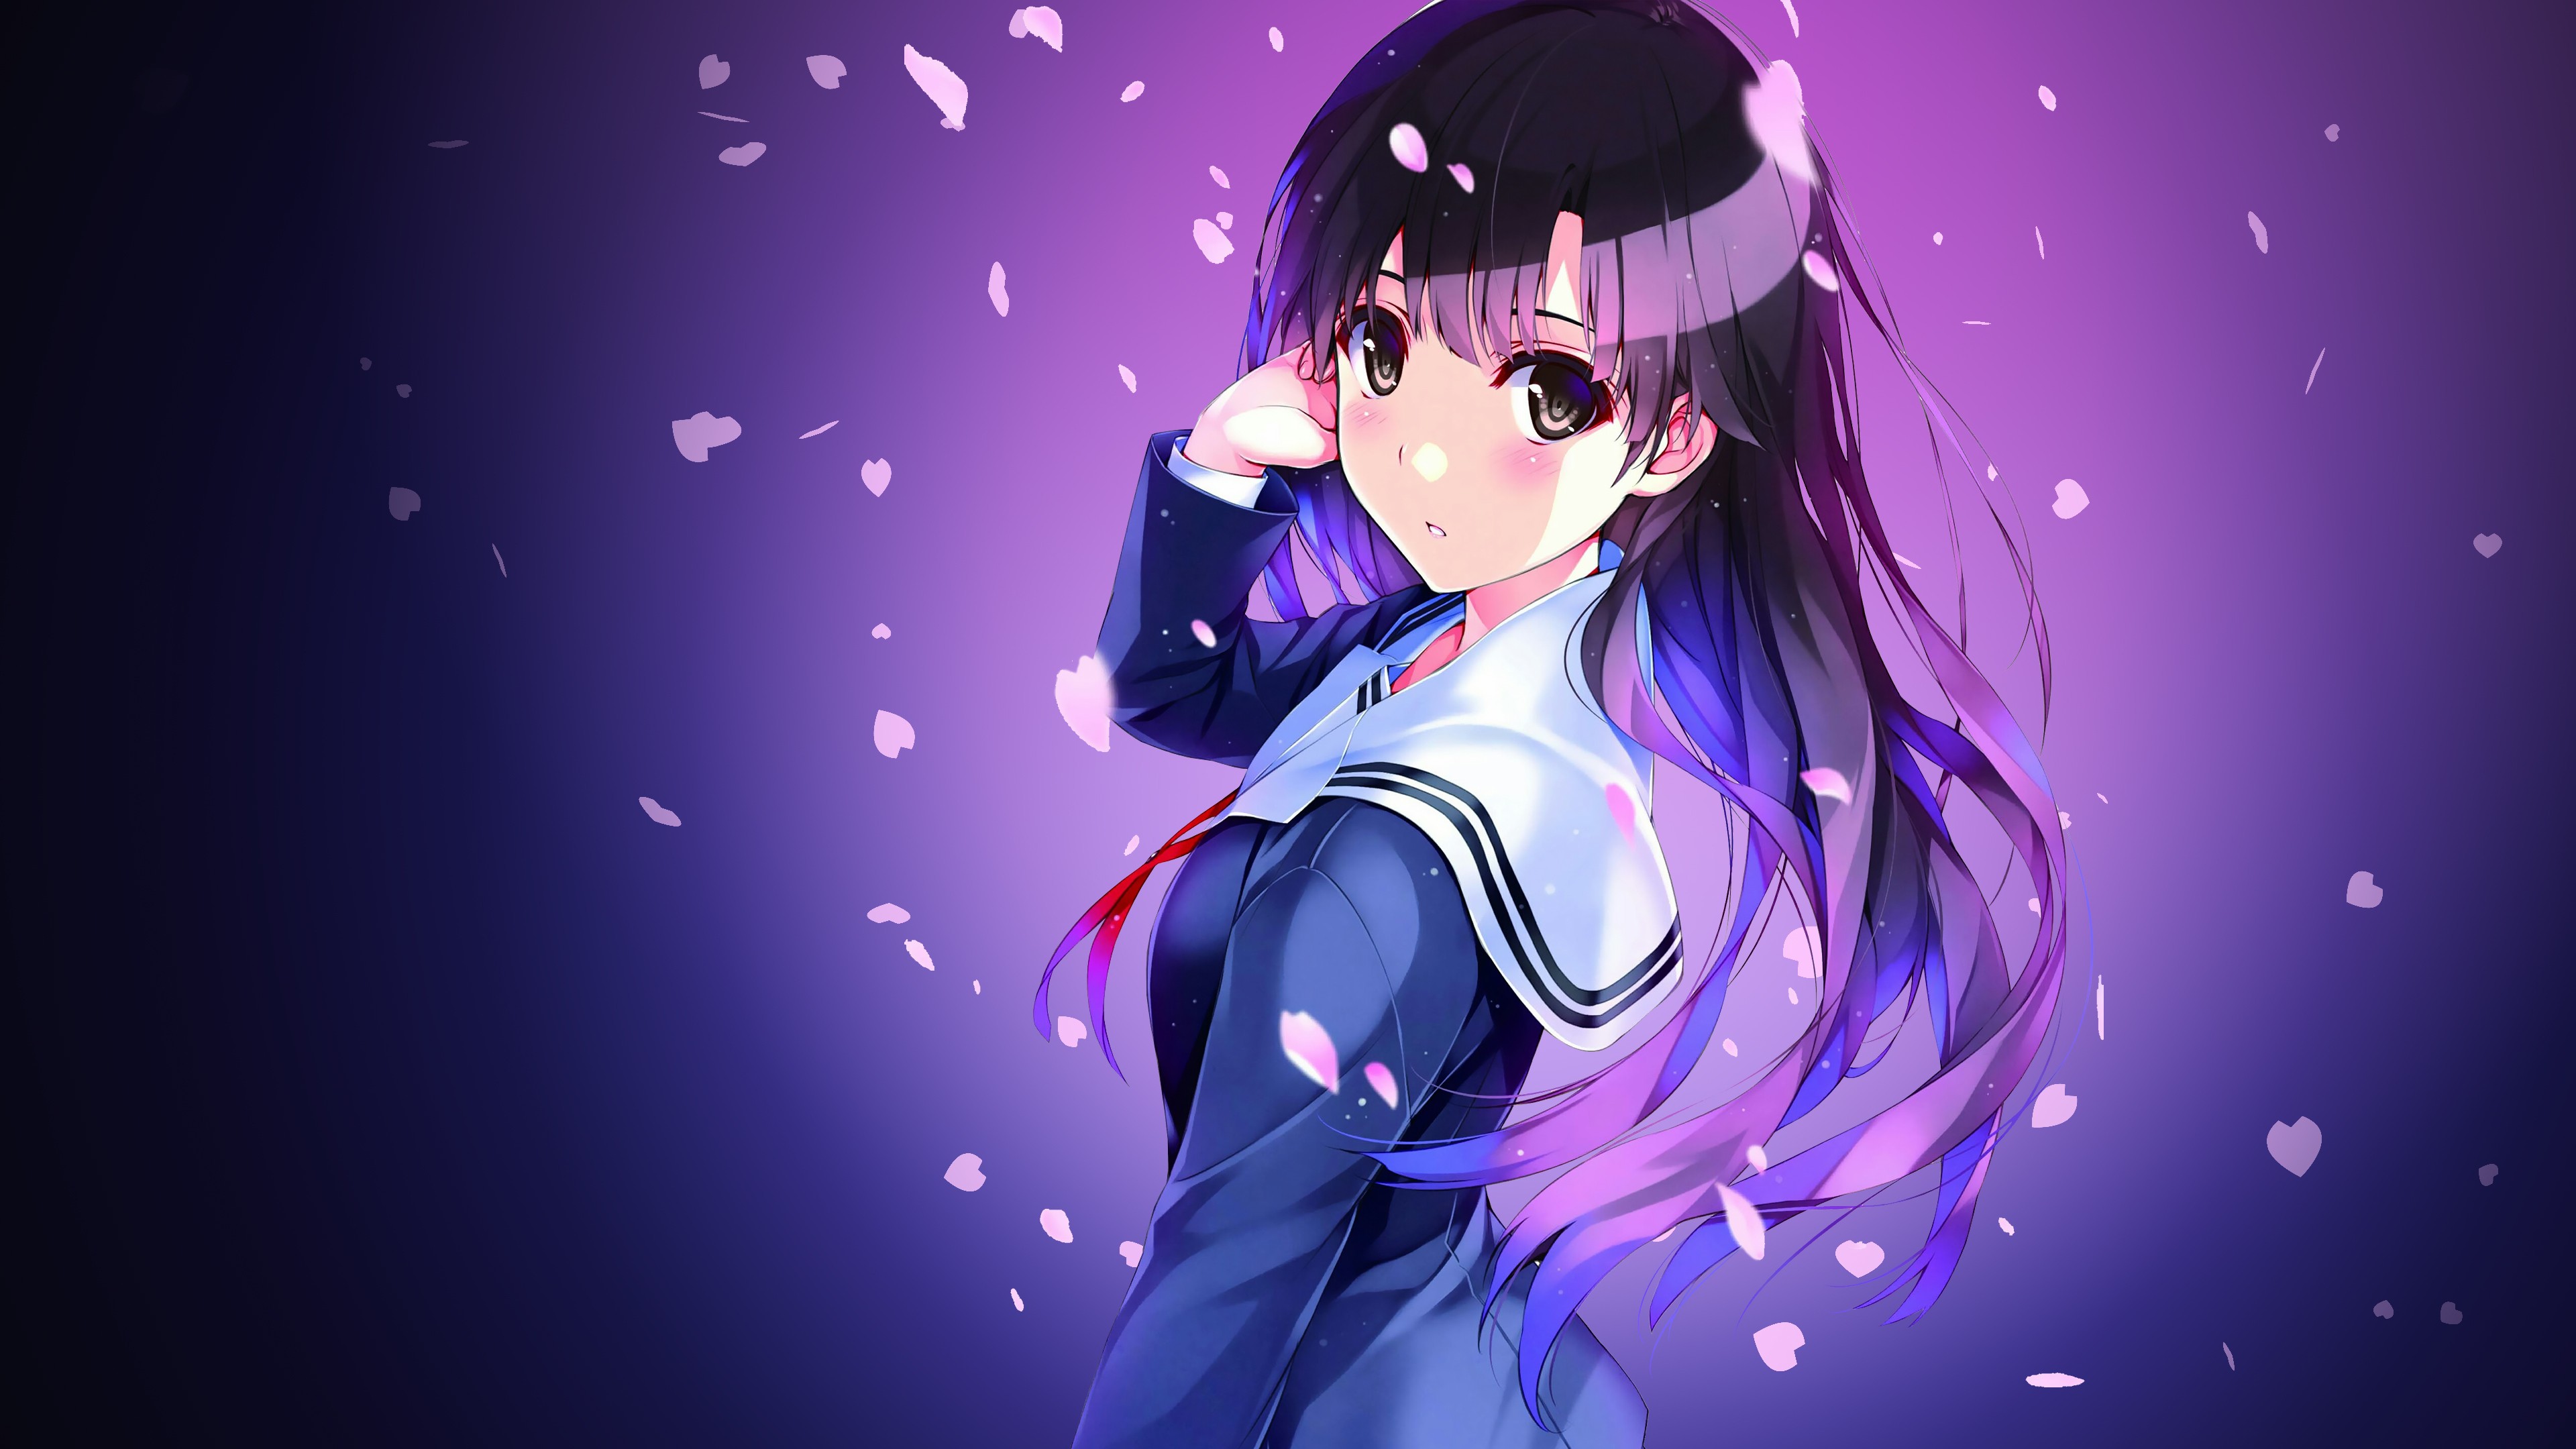 Anime Girl wallpaper HD ·① Download free cool full HD wallpapers for desktop computers and 